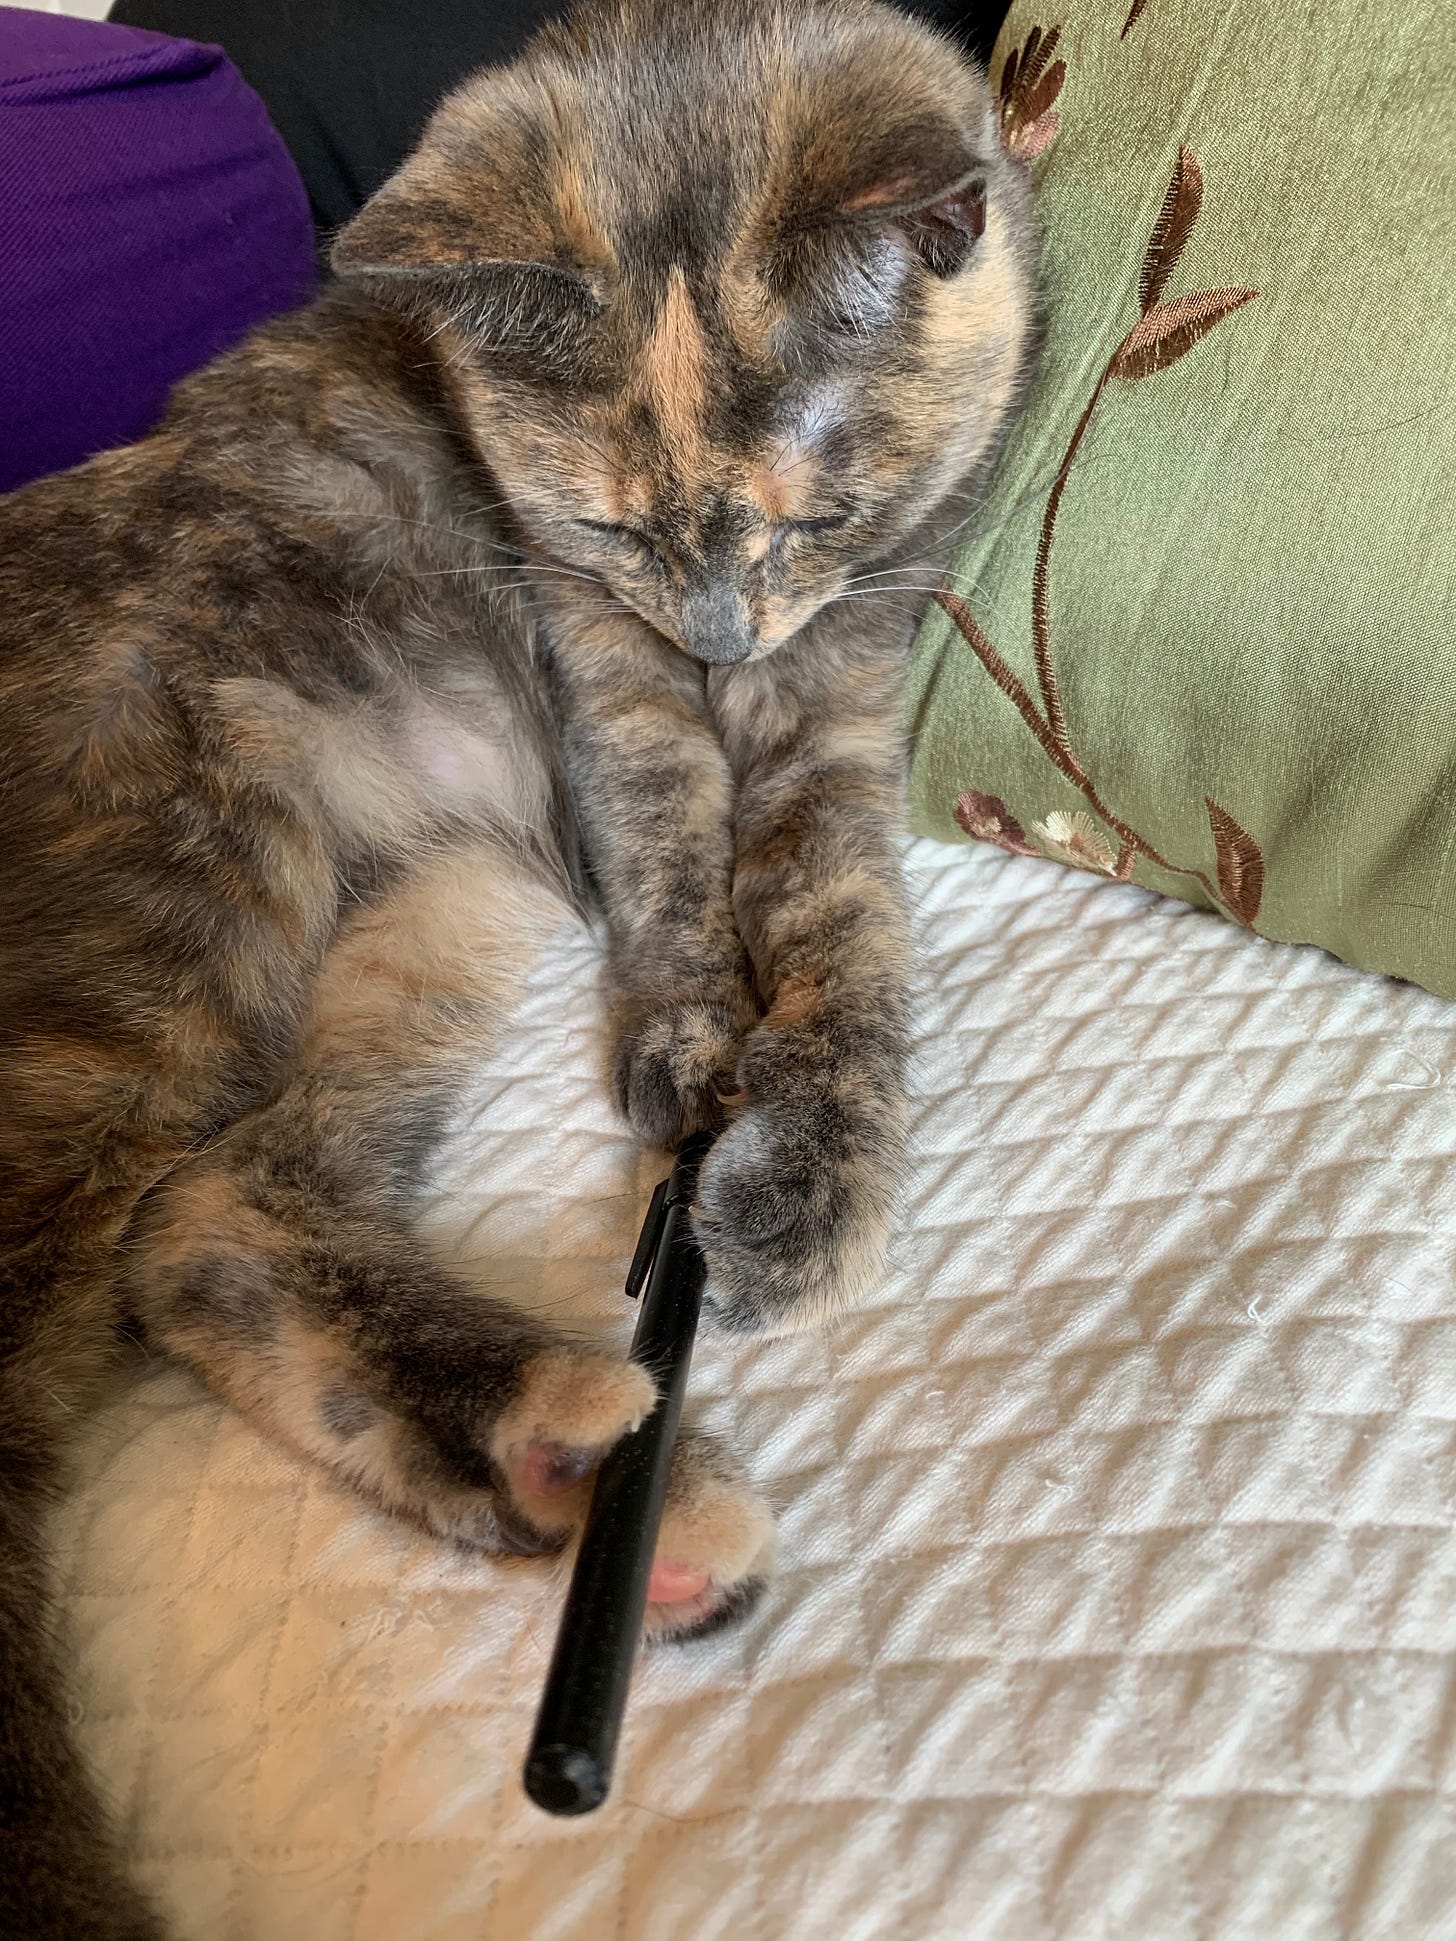 A dilute tortoiseshell cat is sitting, more or less like a person, on a couch. She is holding a black ballpoint pen between her toes.